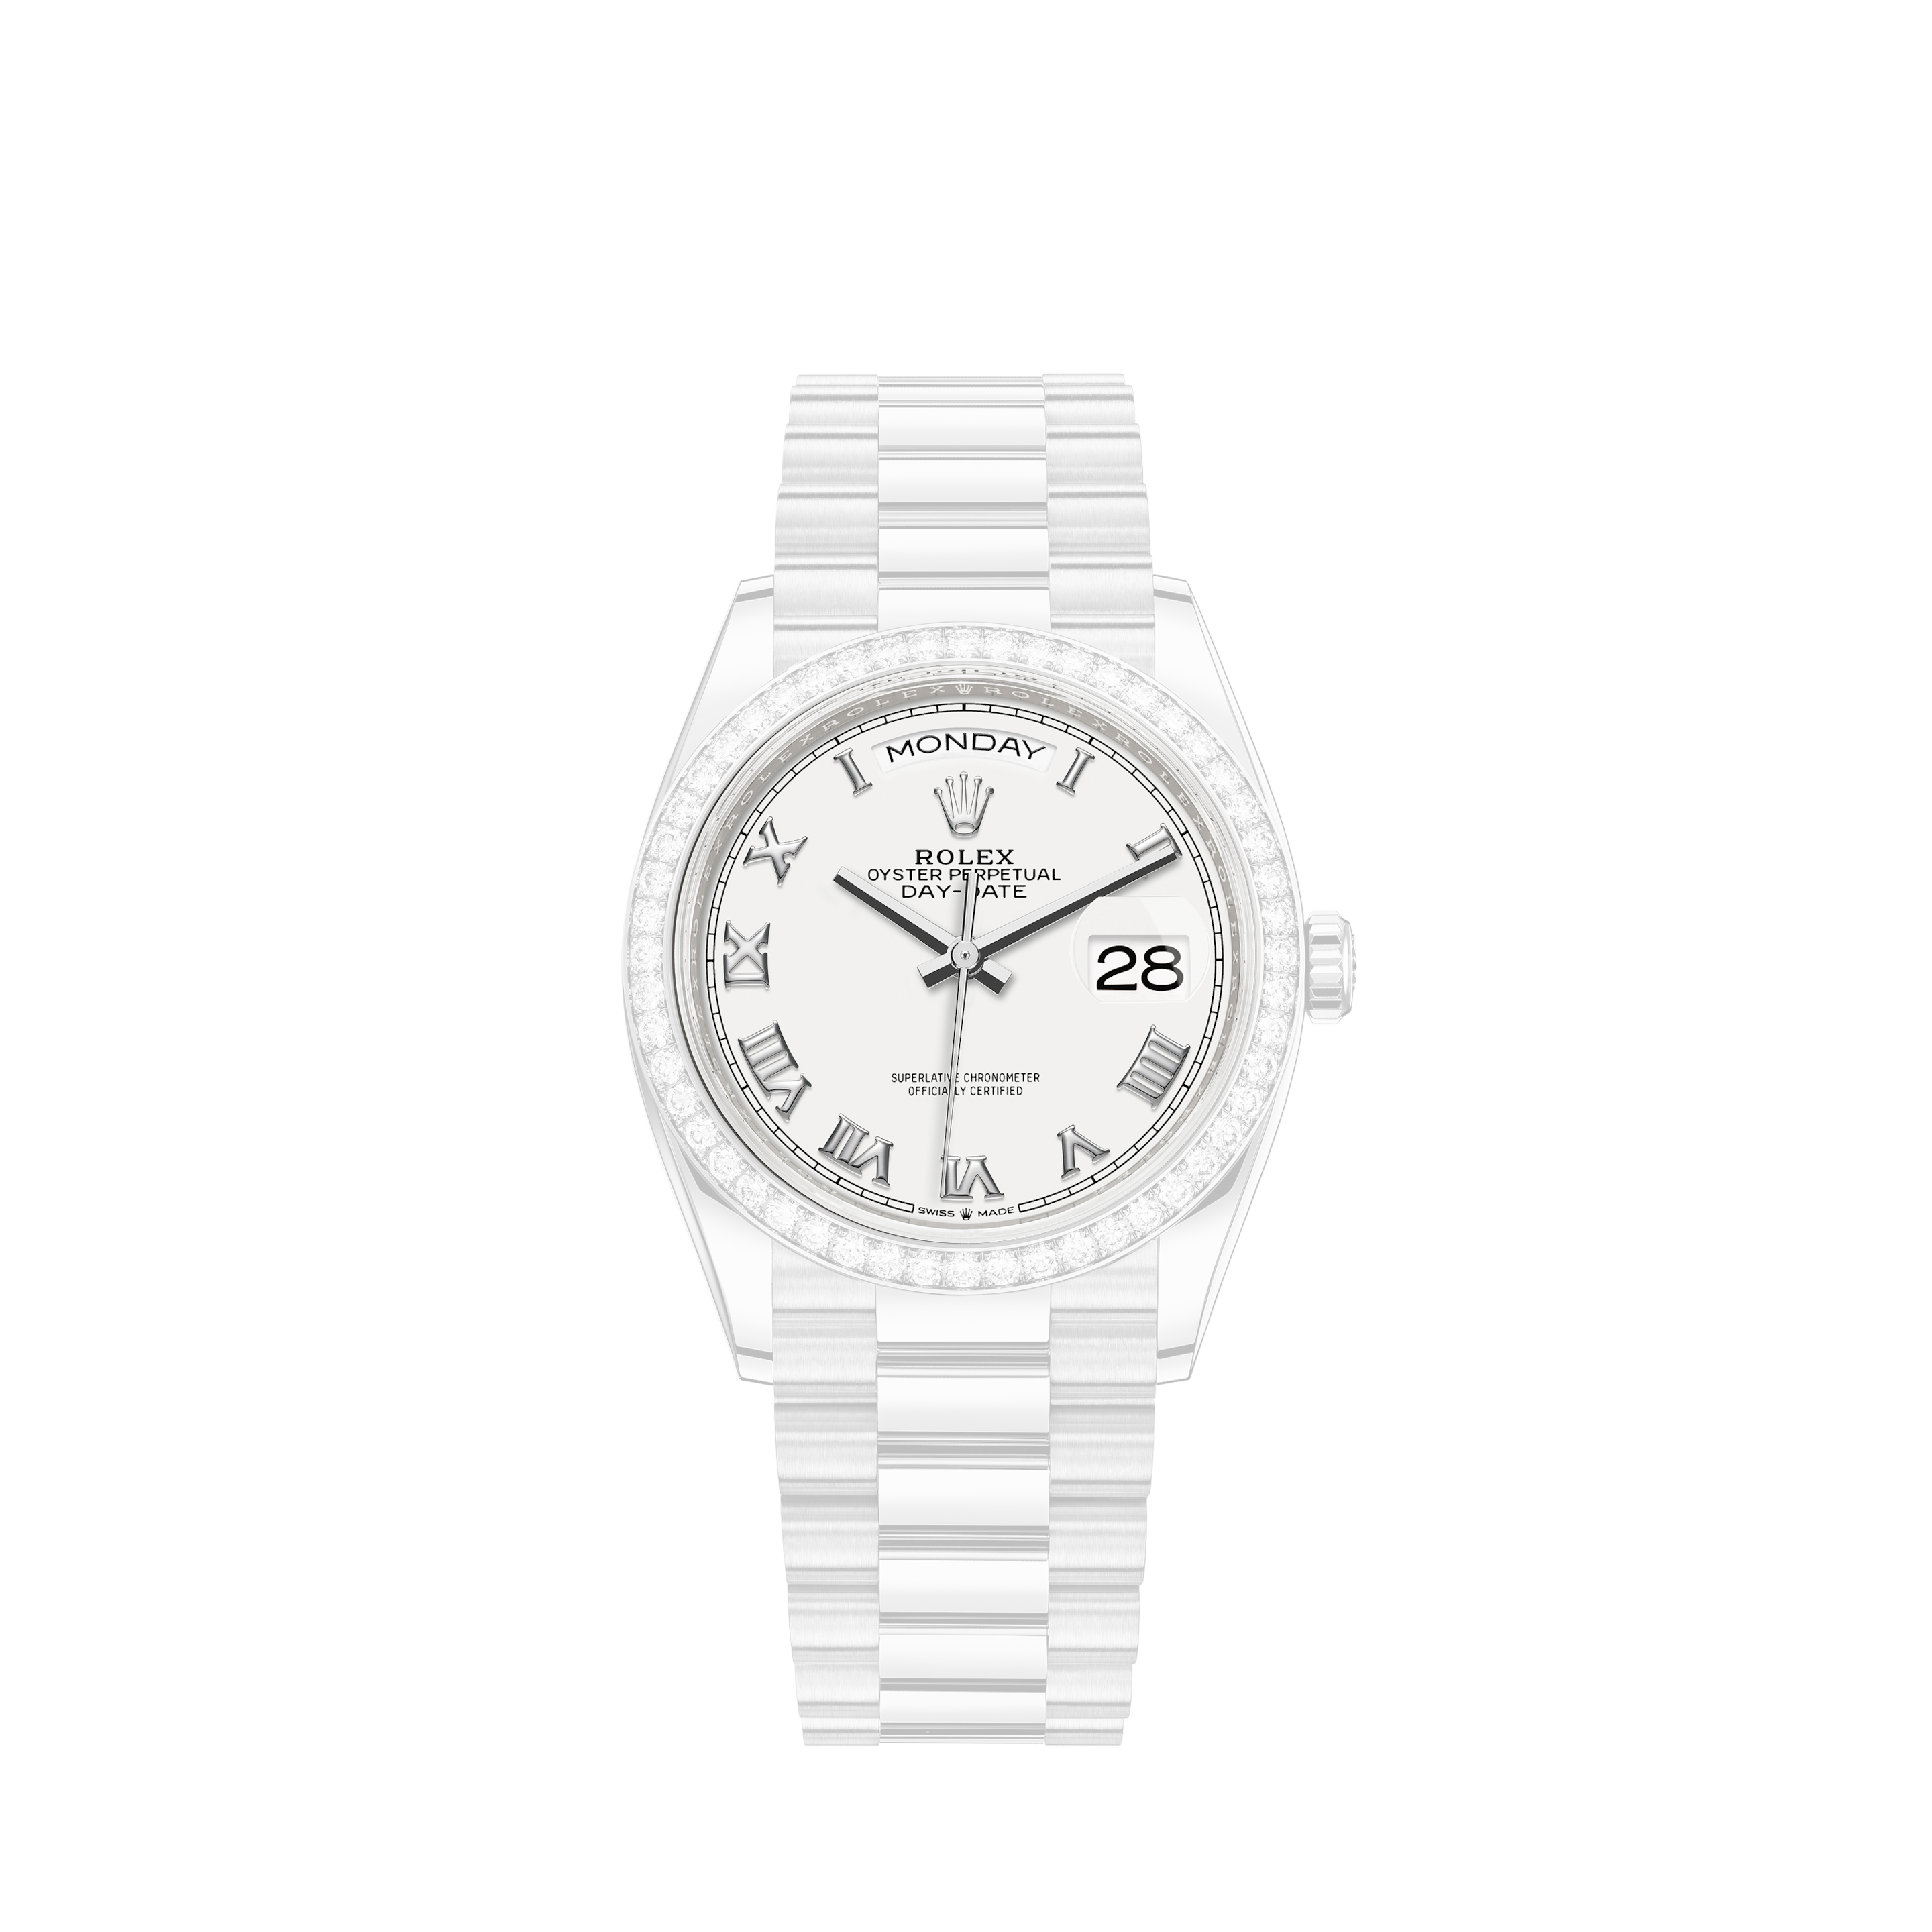 Rolex Datejust President Automatic 18K Gold Diamonds QuicksetRolex Datejust President Diamond Agata Dial